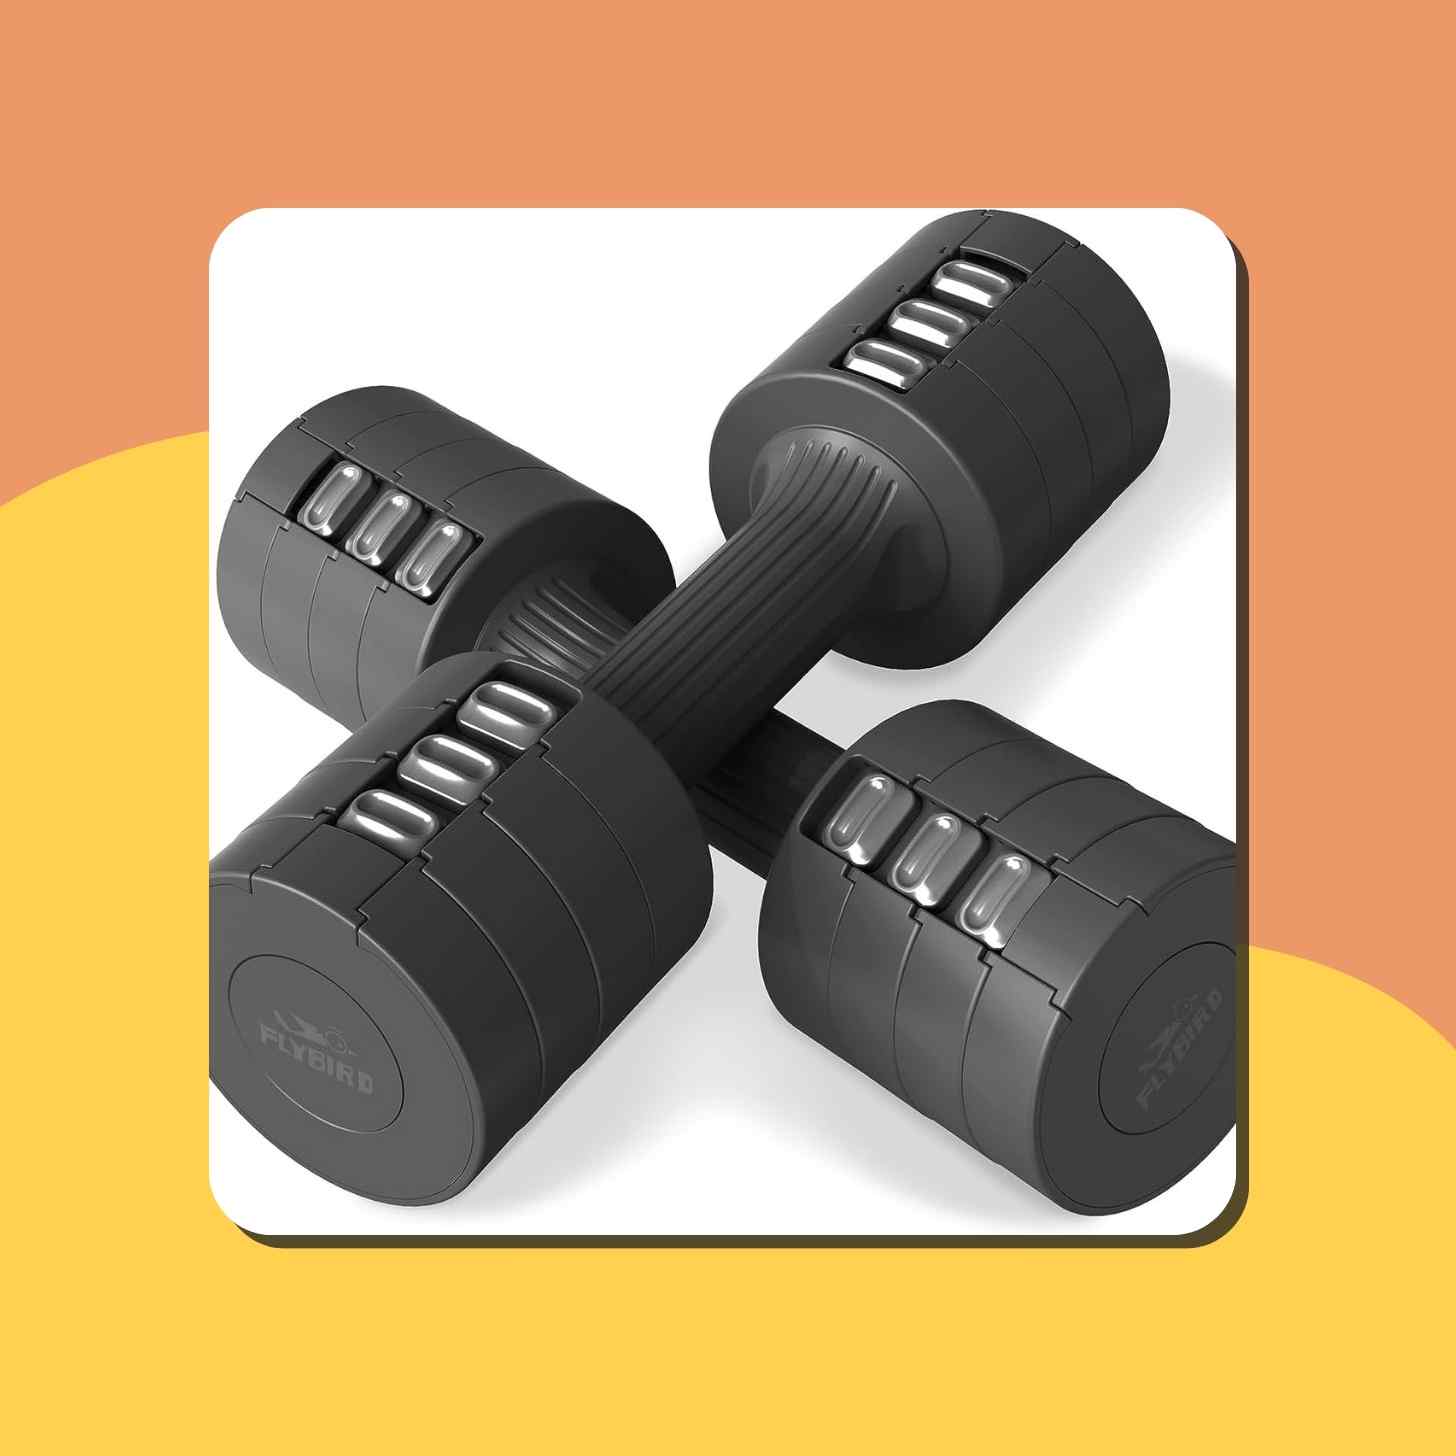 A Pair Of Adjustable Dumbbells